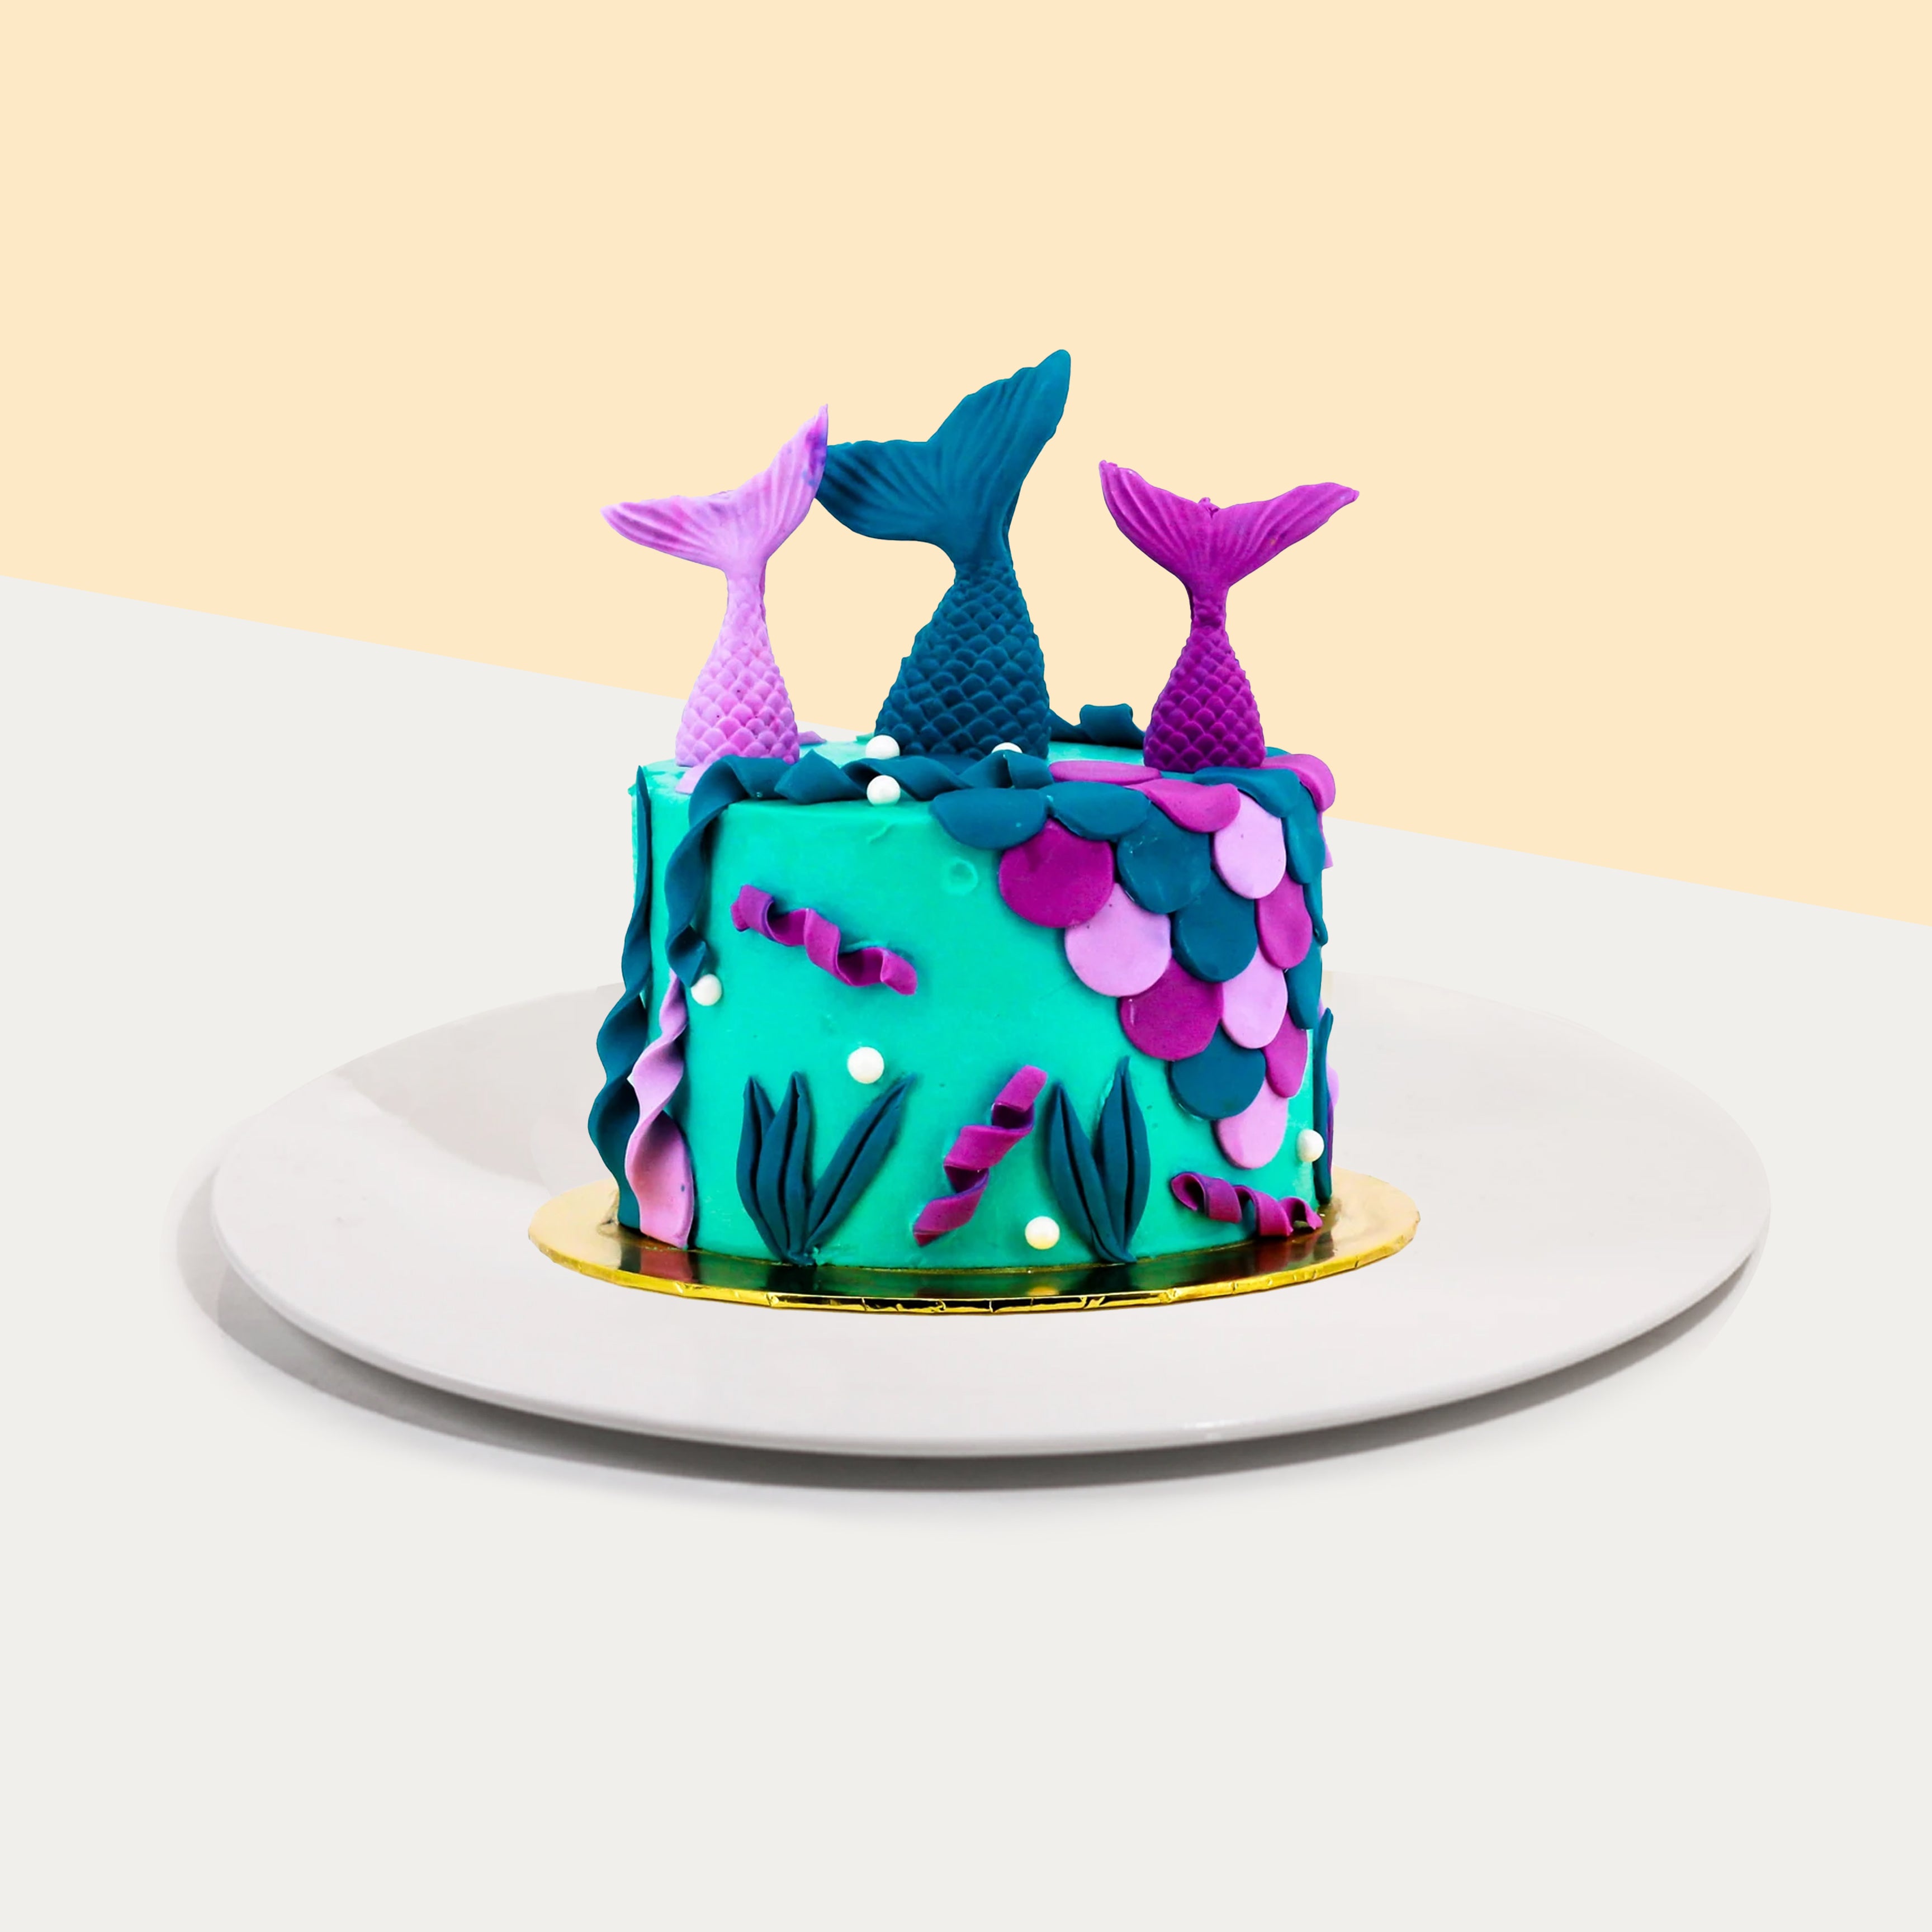 Mermaid Ice Cream Birthday Cake - You're Gonna Bake It After All